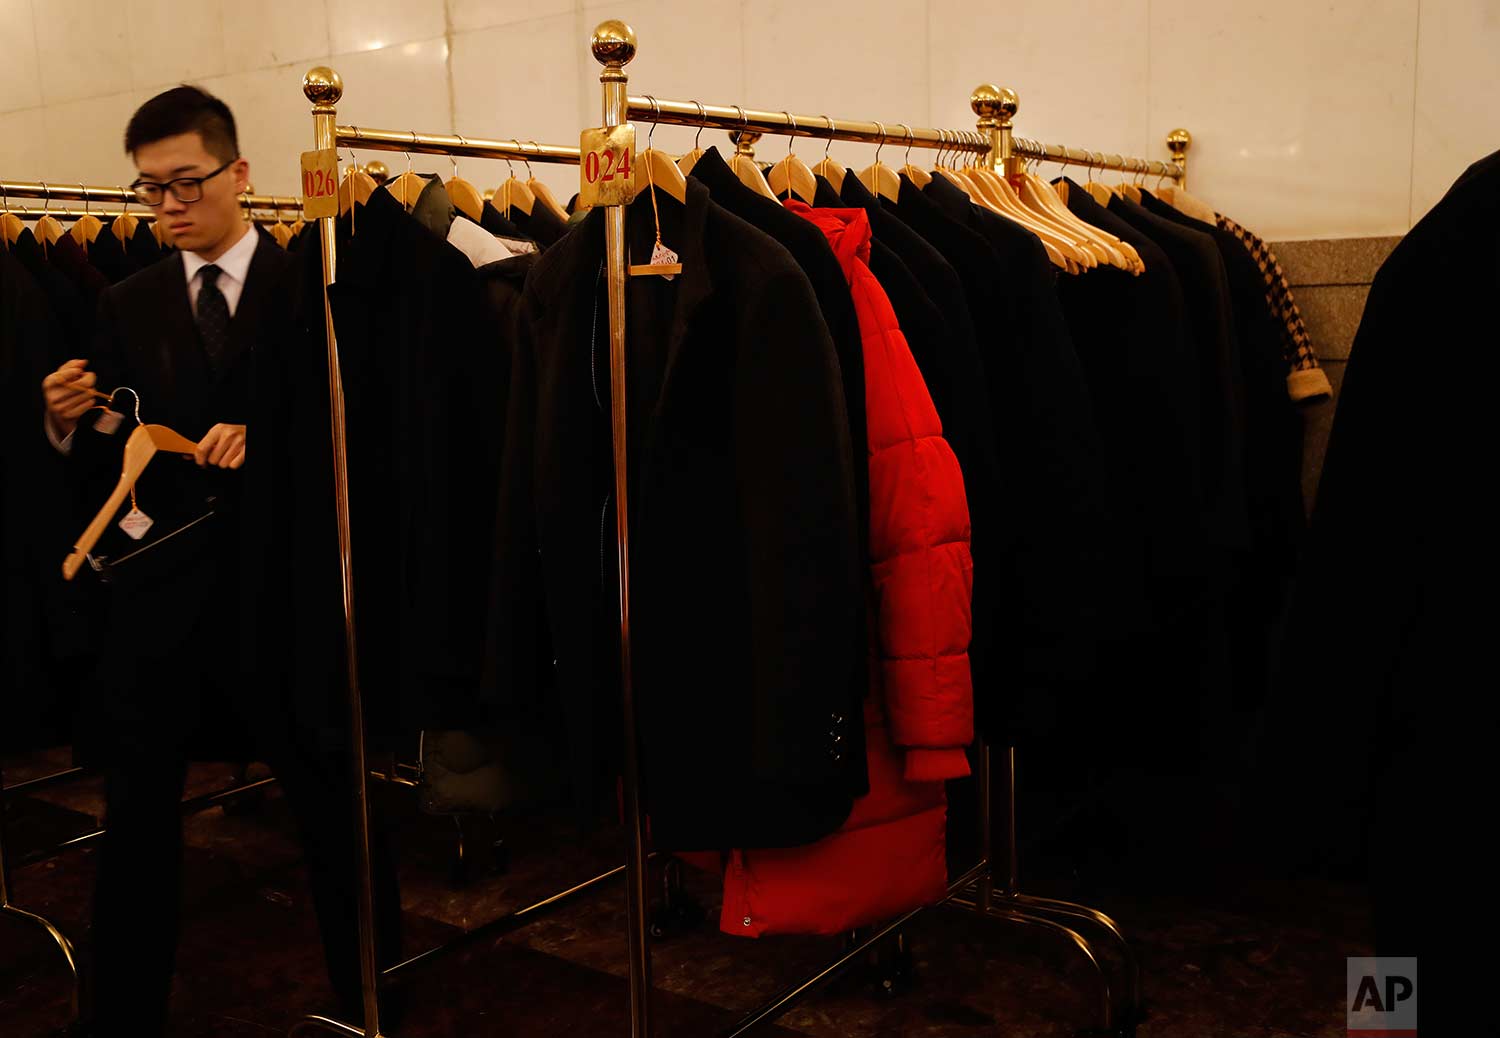  In this Tuesday, March 13, 2018 photo, a red jacket hangs amid black coats before the start during a plenary session of China's National People's Congress (NPC) at the Great Hall of People in Beijing. (AP Photo/Aijaz Rahi) 